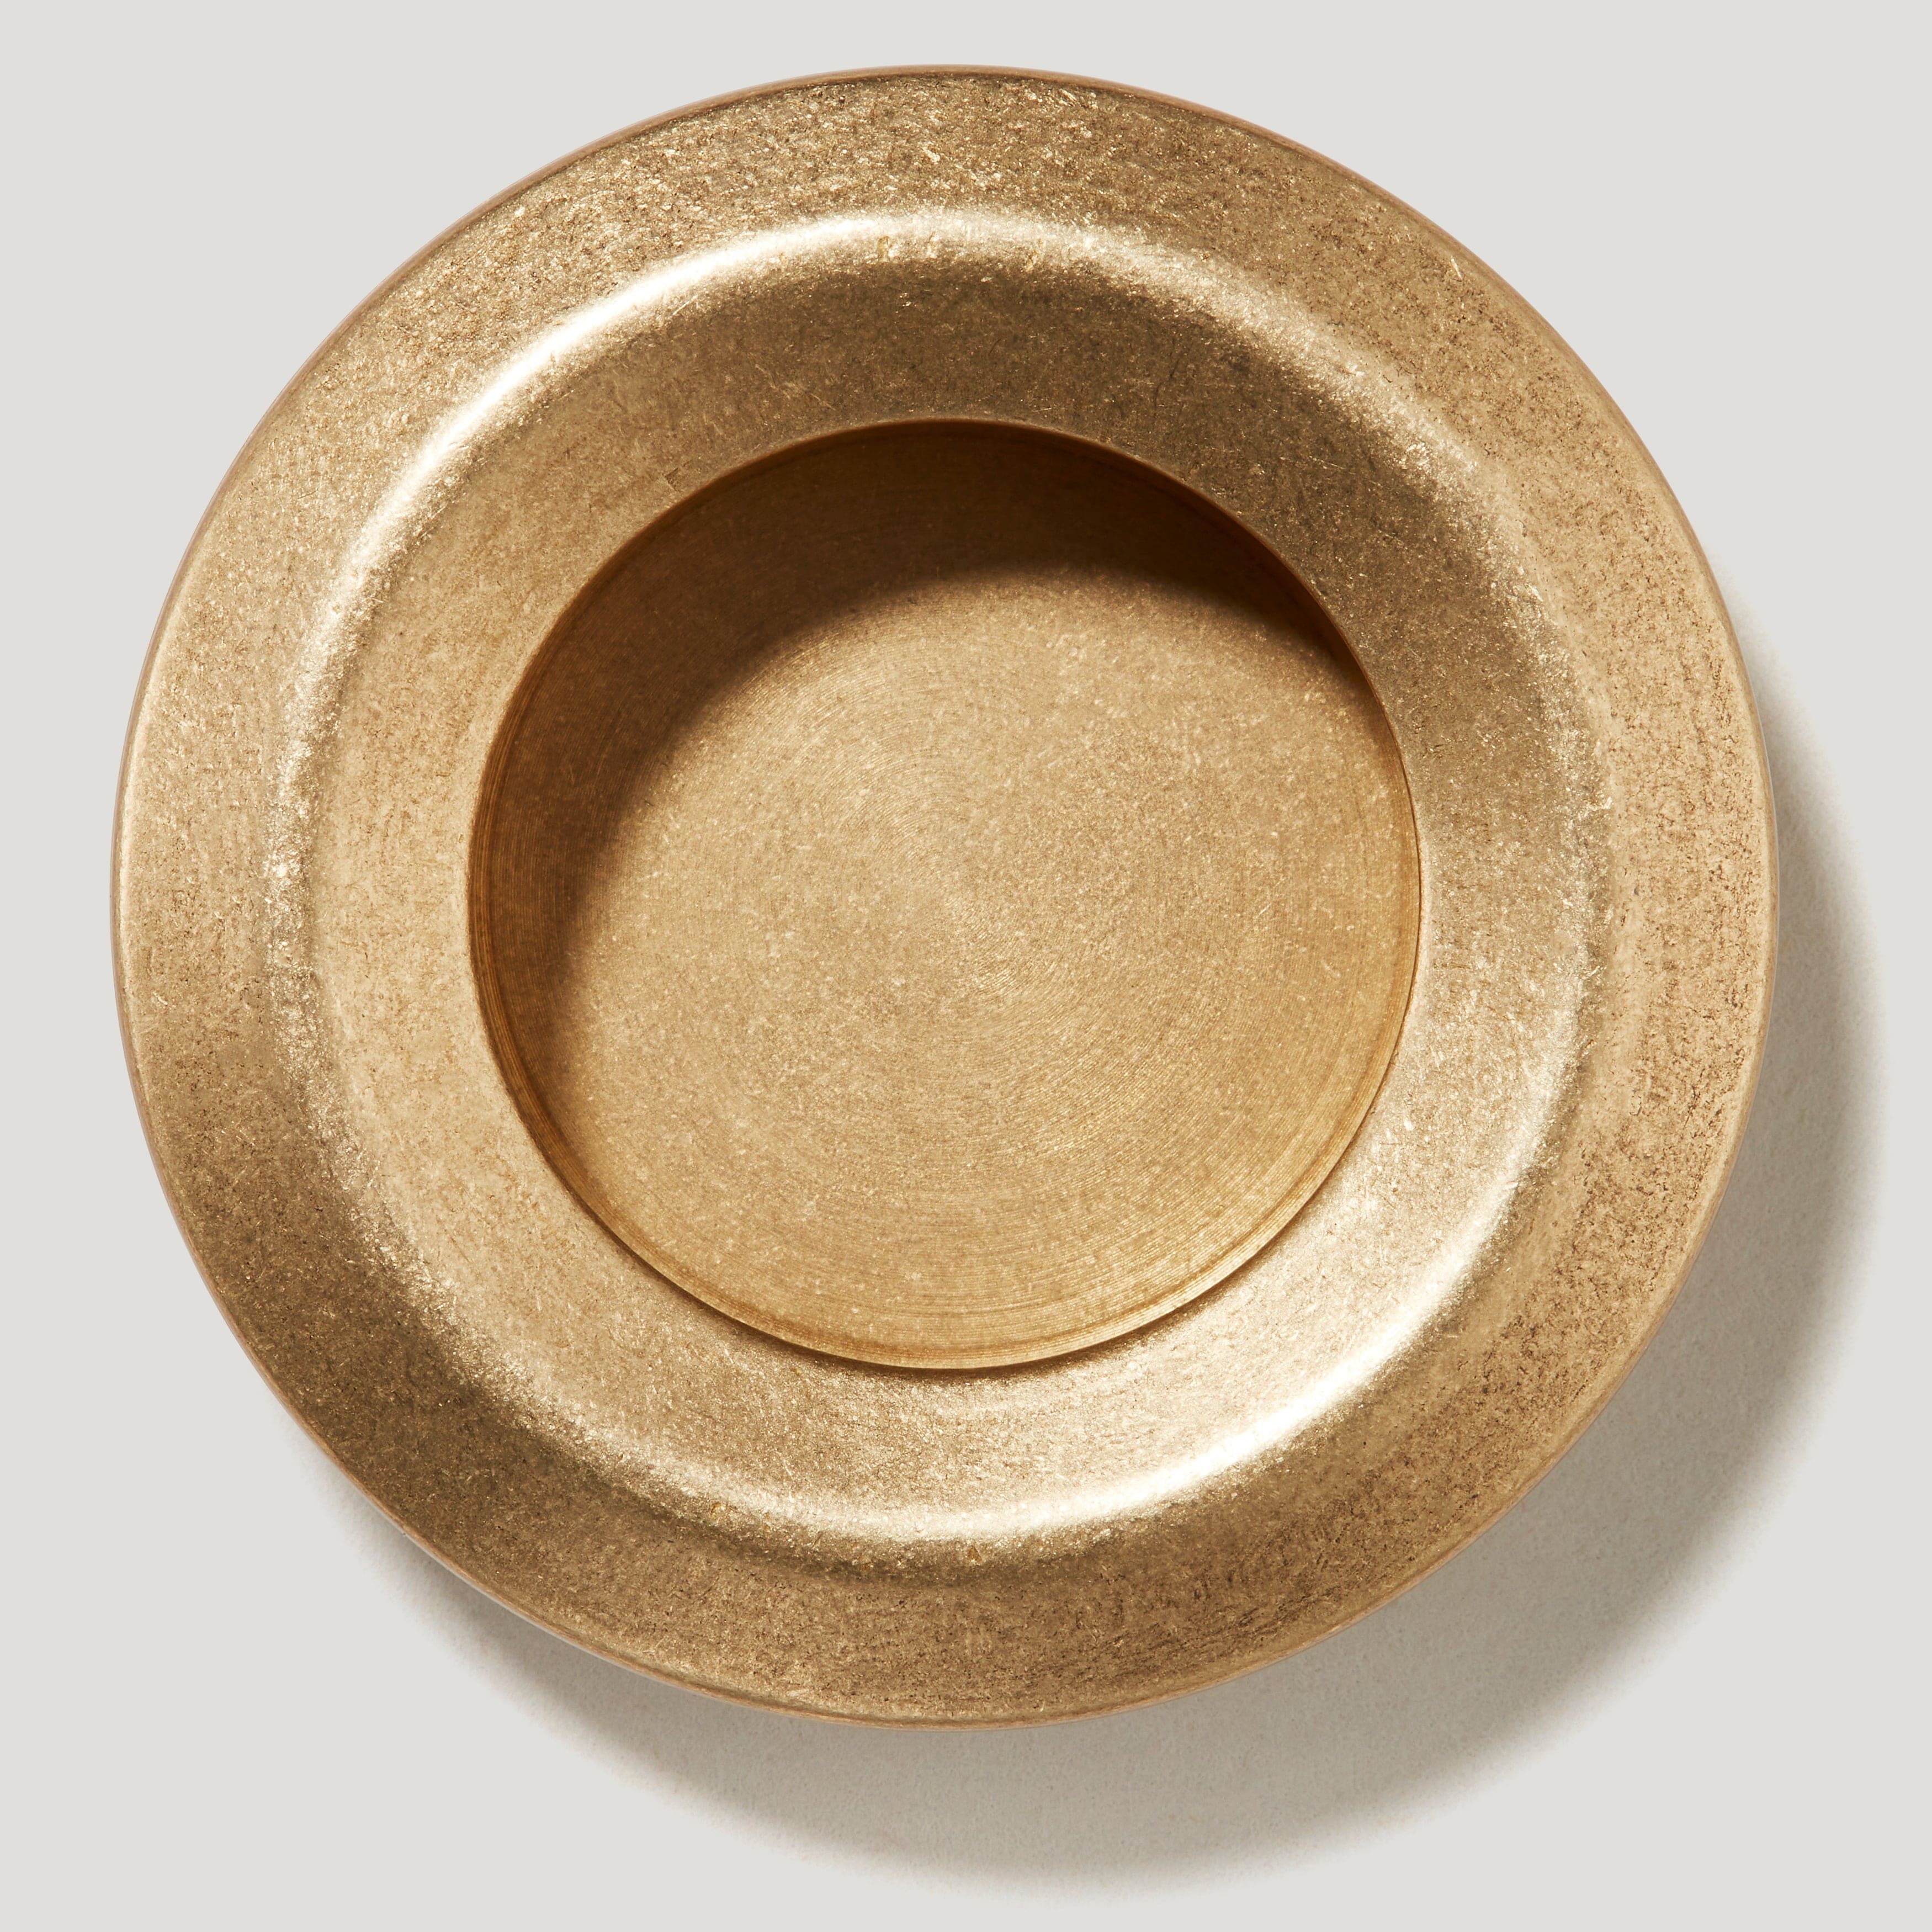 Plank Hardware OLMO Round Recessed Pull Handle - Aged Brass